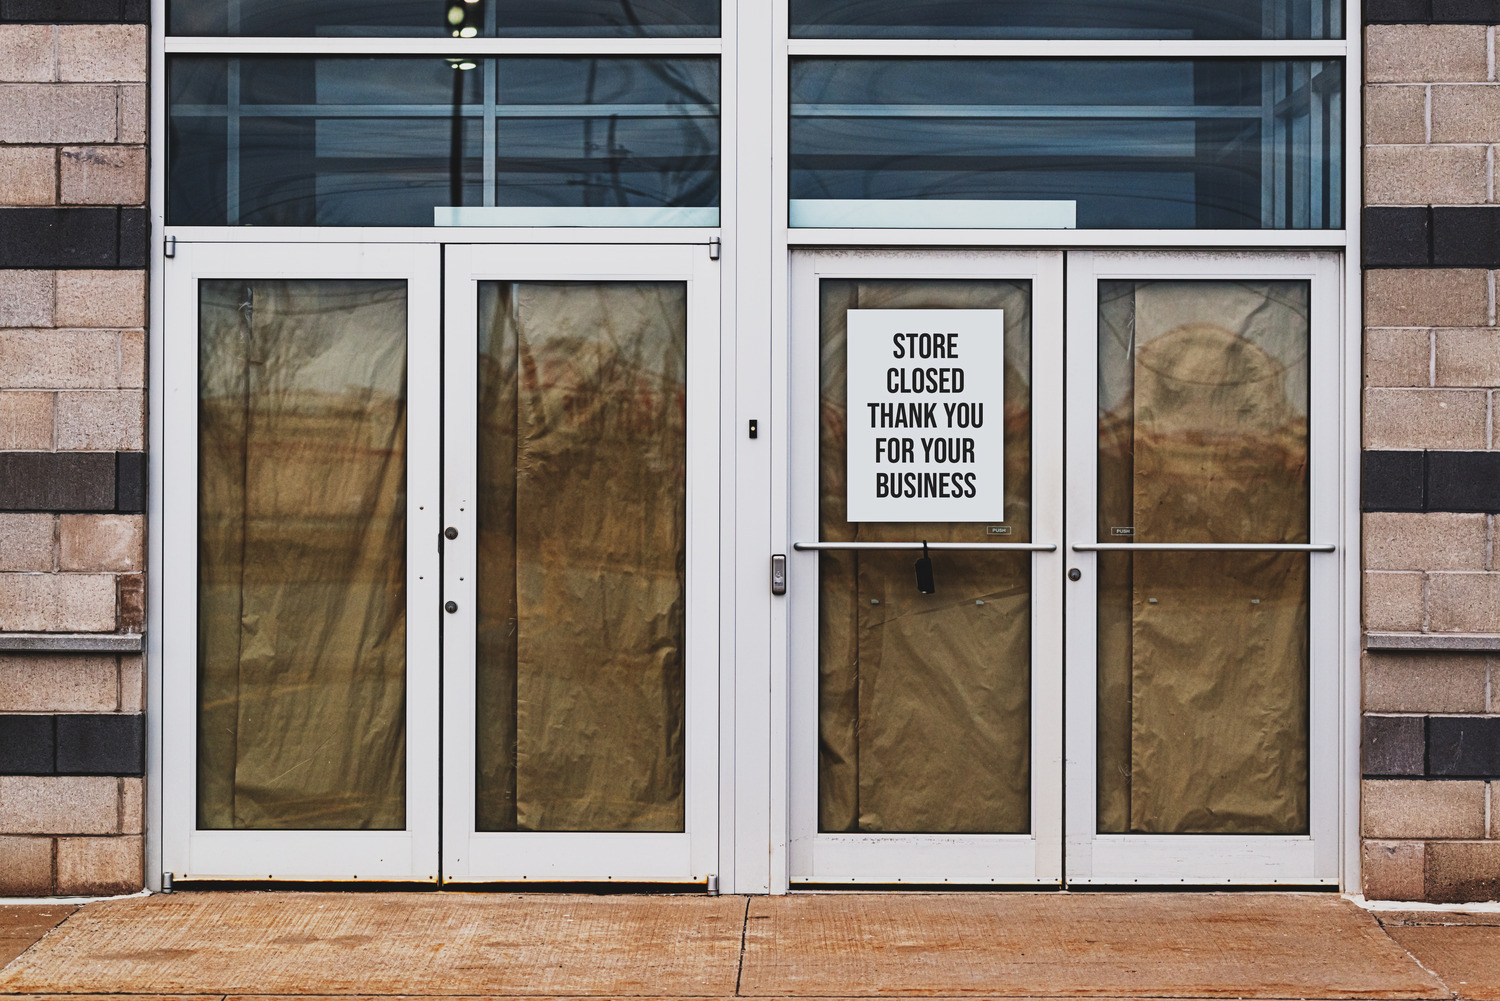 A commercial borrower foreclosed on their retail space, putting a sign that says, "Store Closed. Thank you for your business," in the glass door.